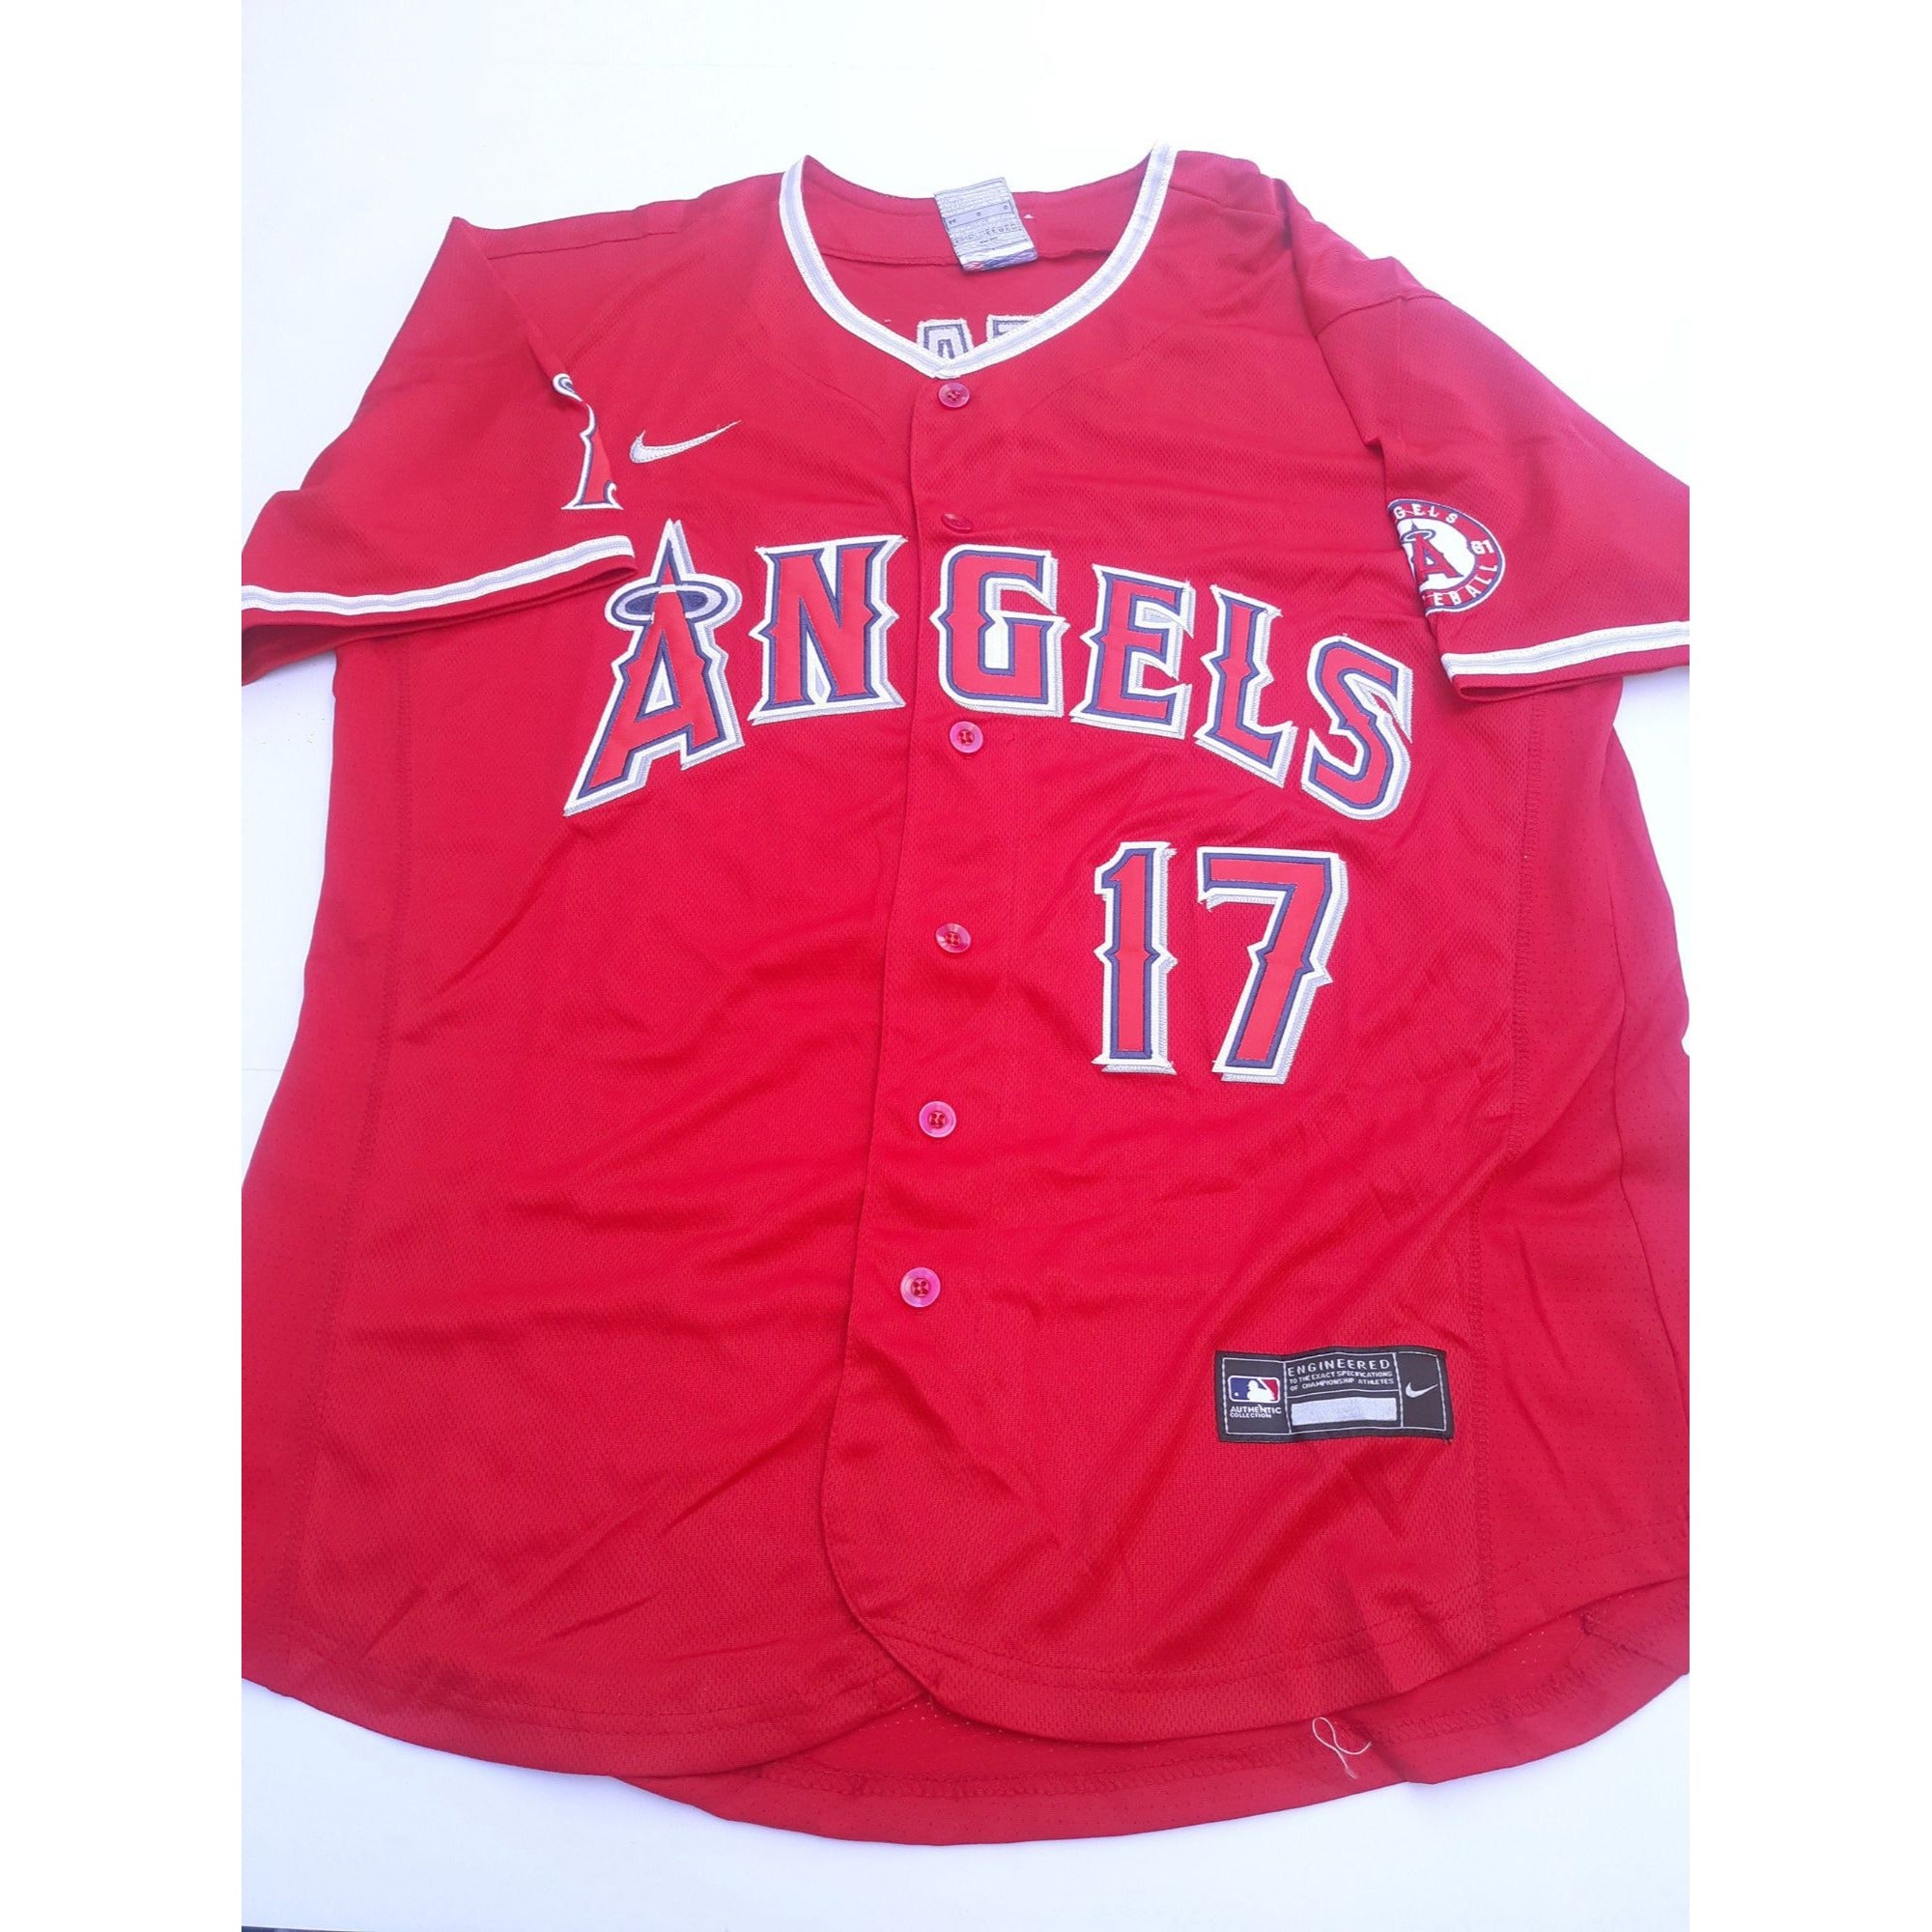 Awesome Artifacts Shohei Ohtani Anaheim Angels Authentic Jersey Signed with Proof by Awesome Artifact